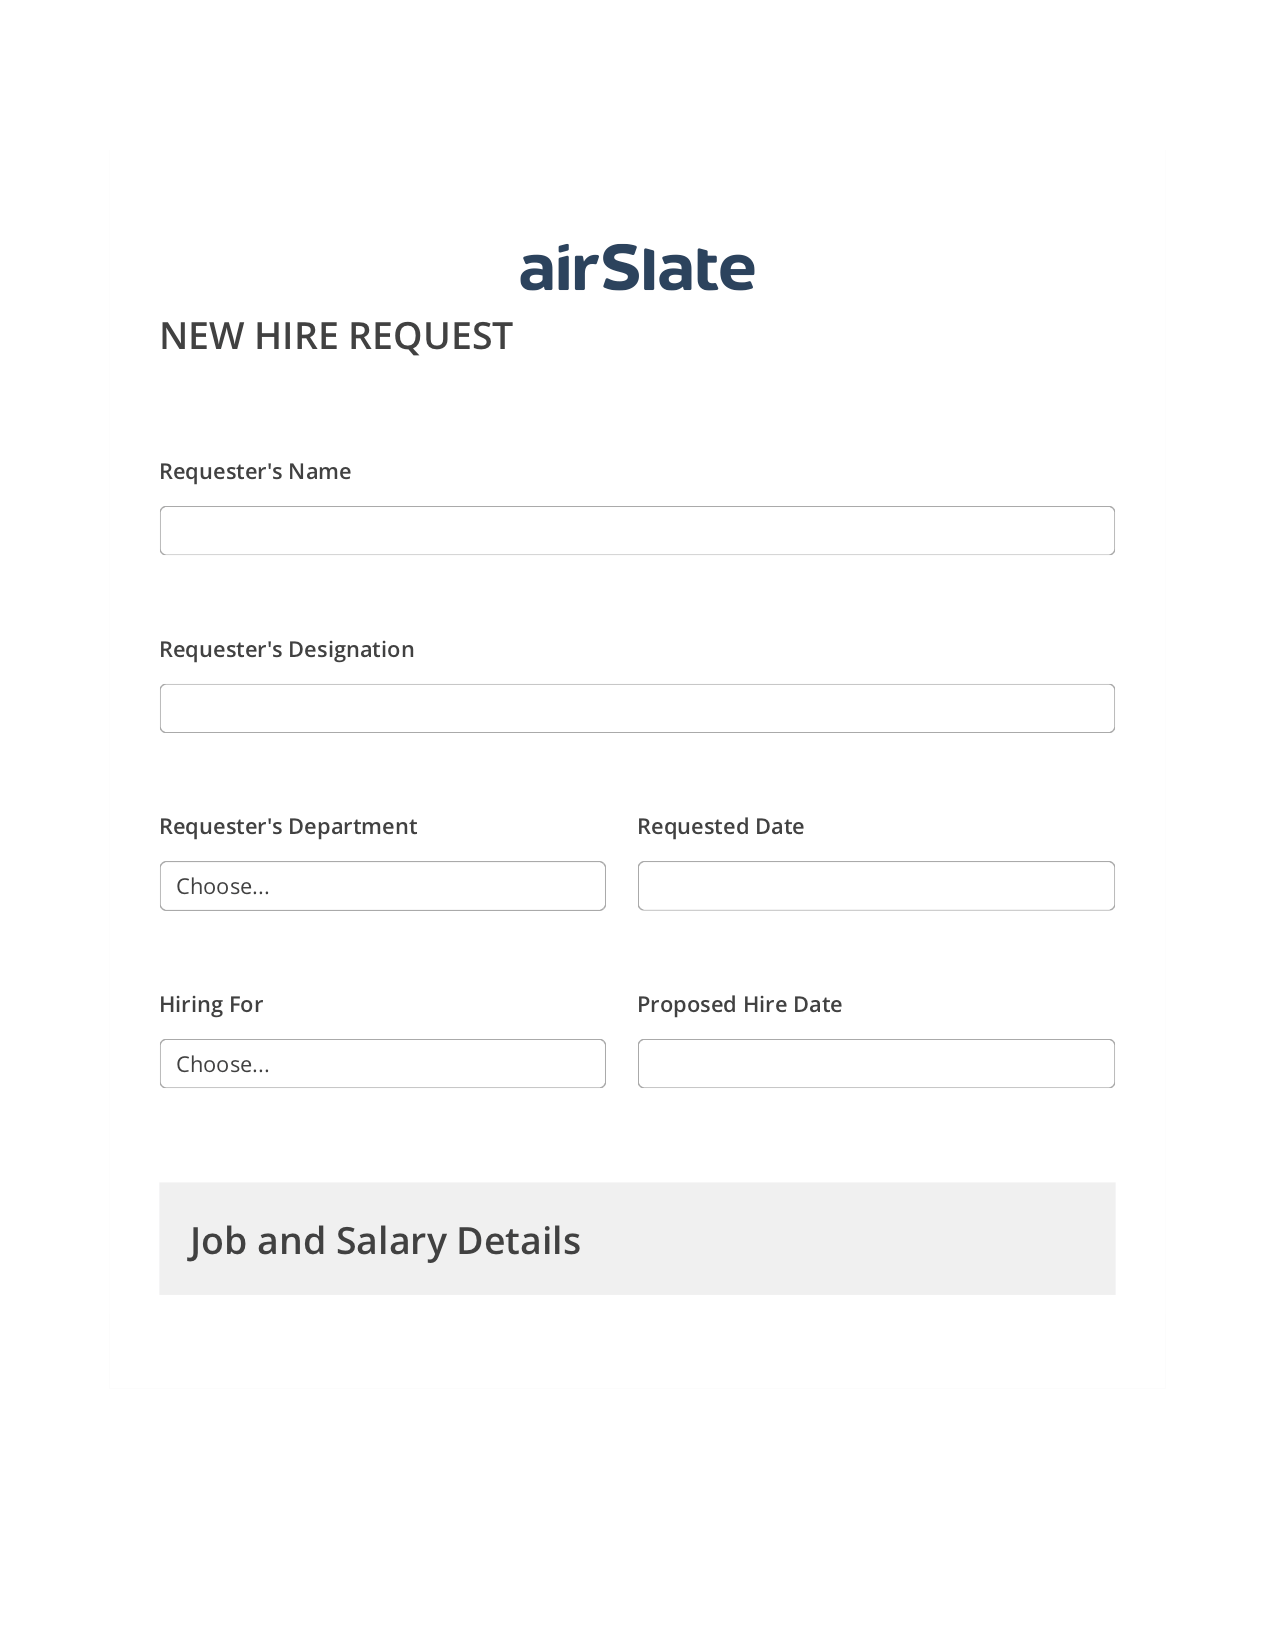 Hiring Request Workflow Pre-fill Document Bot, Create Slate every Google Sheet Update Bot, Export to Excel 365 Bot